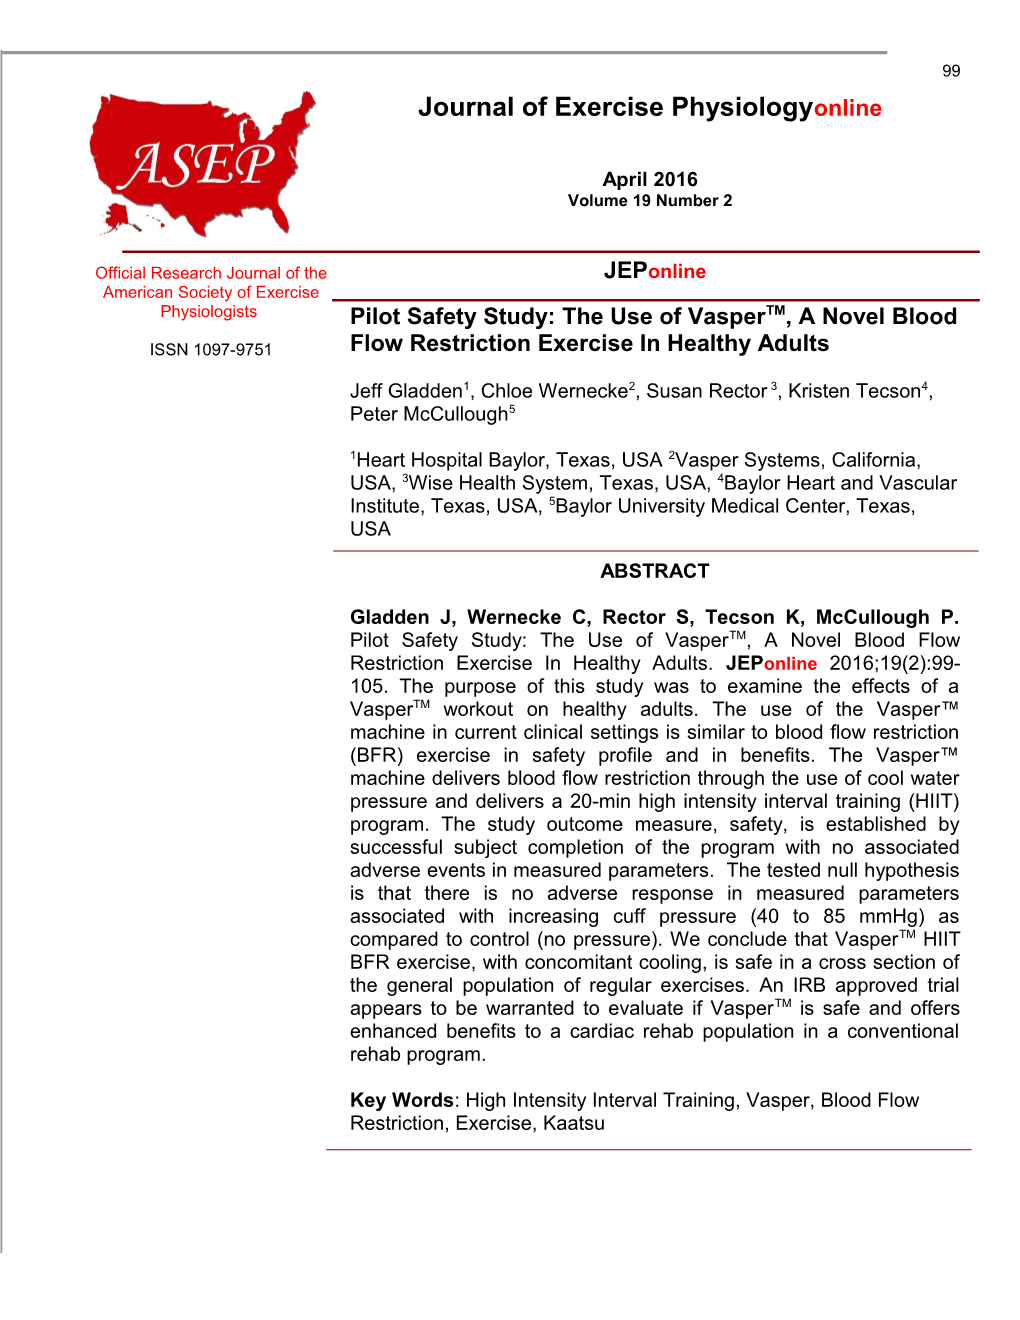 Pilot Safety Study: the Use of Vaspertm, Anovel Blood Flow Restriction Exercisein Healthy